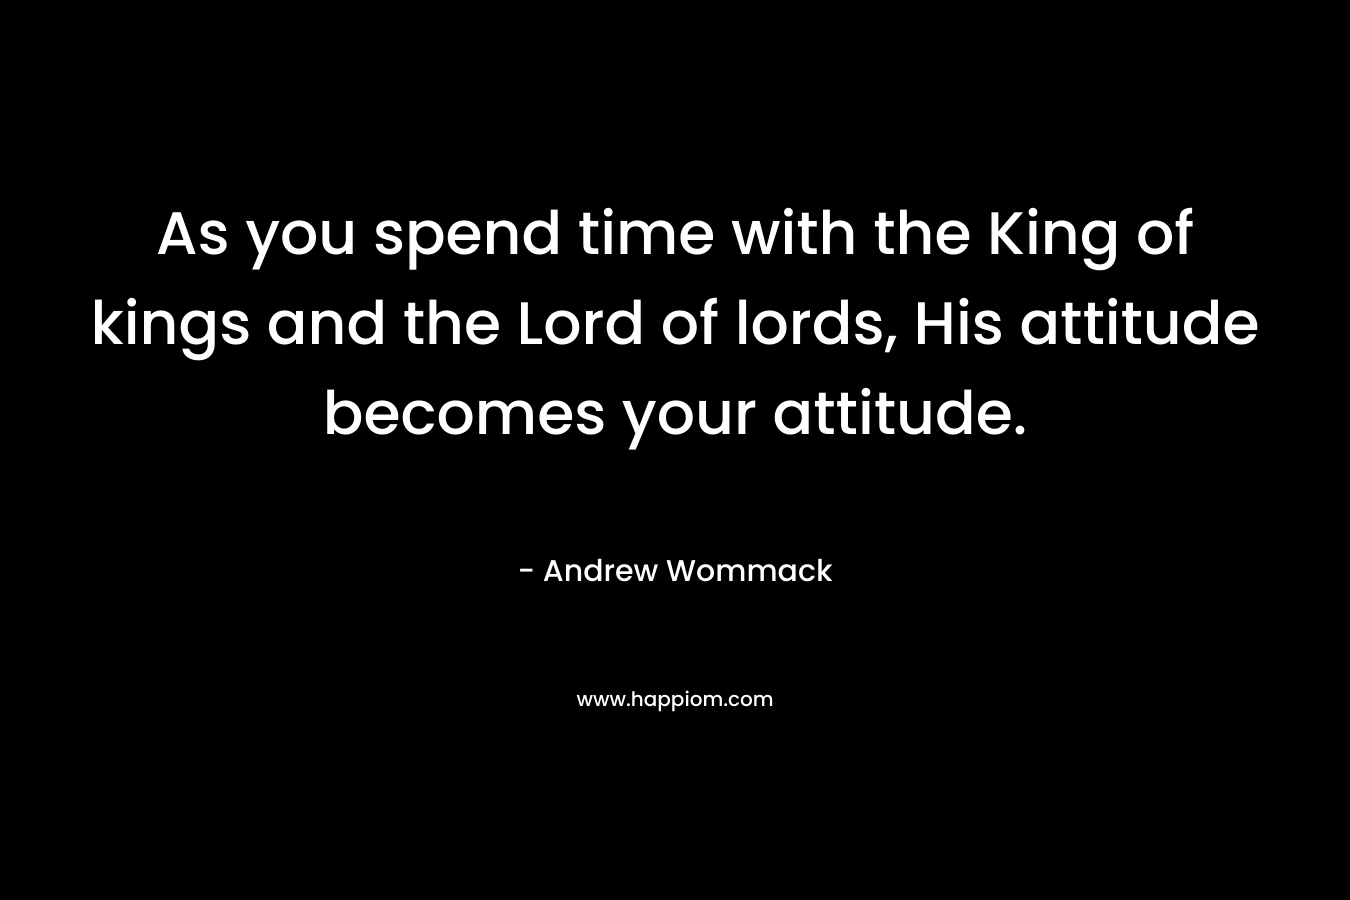 As you spend time with the King of kings and the Lord of lords, His attitude becomes your attitude.